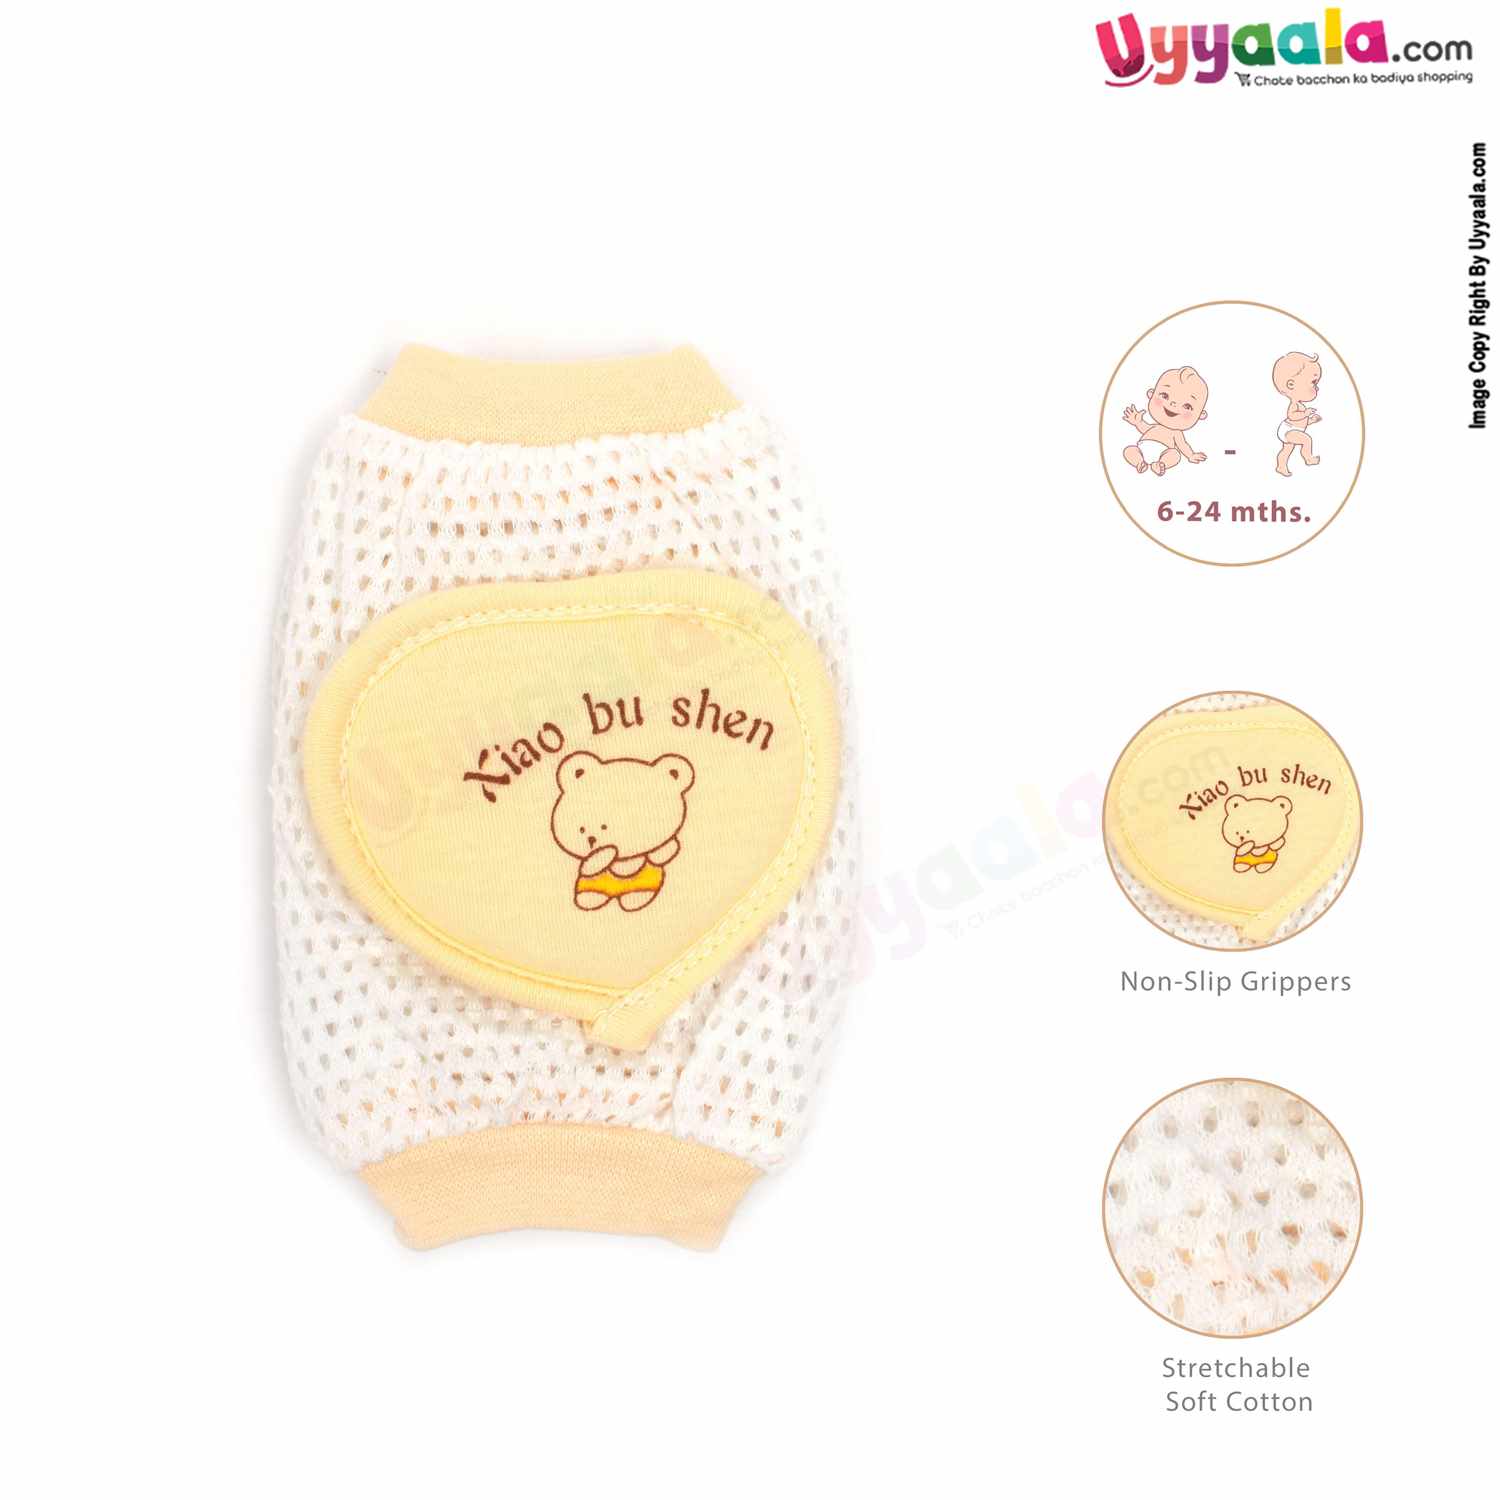 Cotton Stretchable Knee Protection Pads for Crawling Babies with Heart Shape Patch Teddy Bear Print Pack of 1 Pair , 6m-2Y Age - White & Yellow